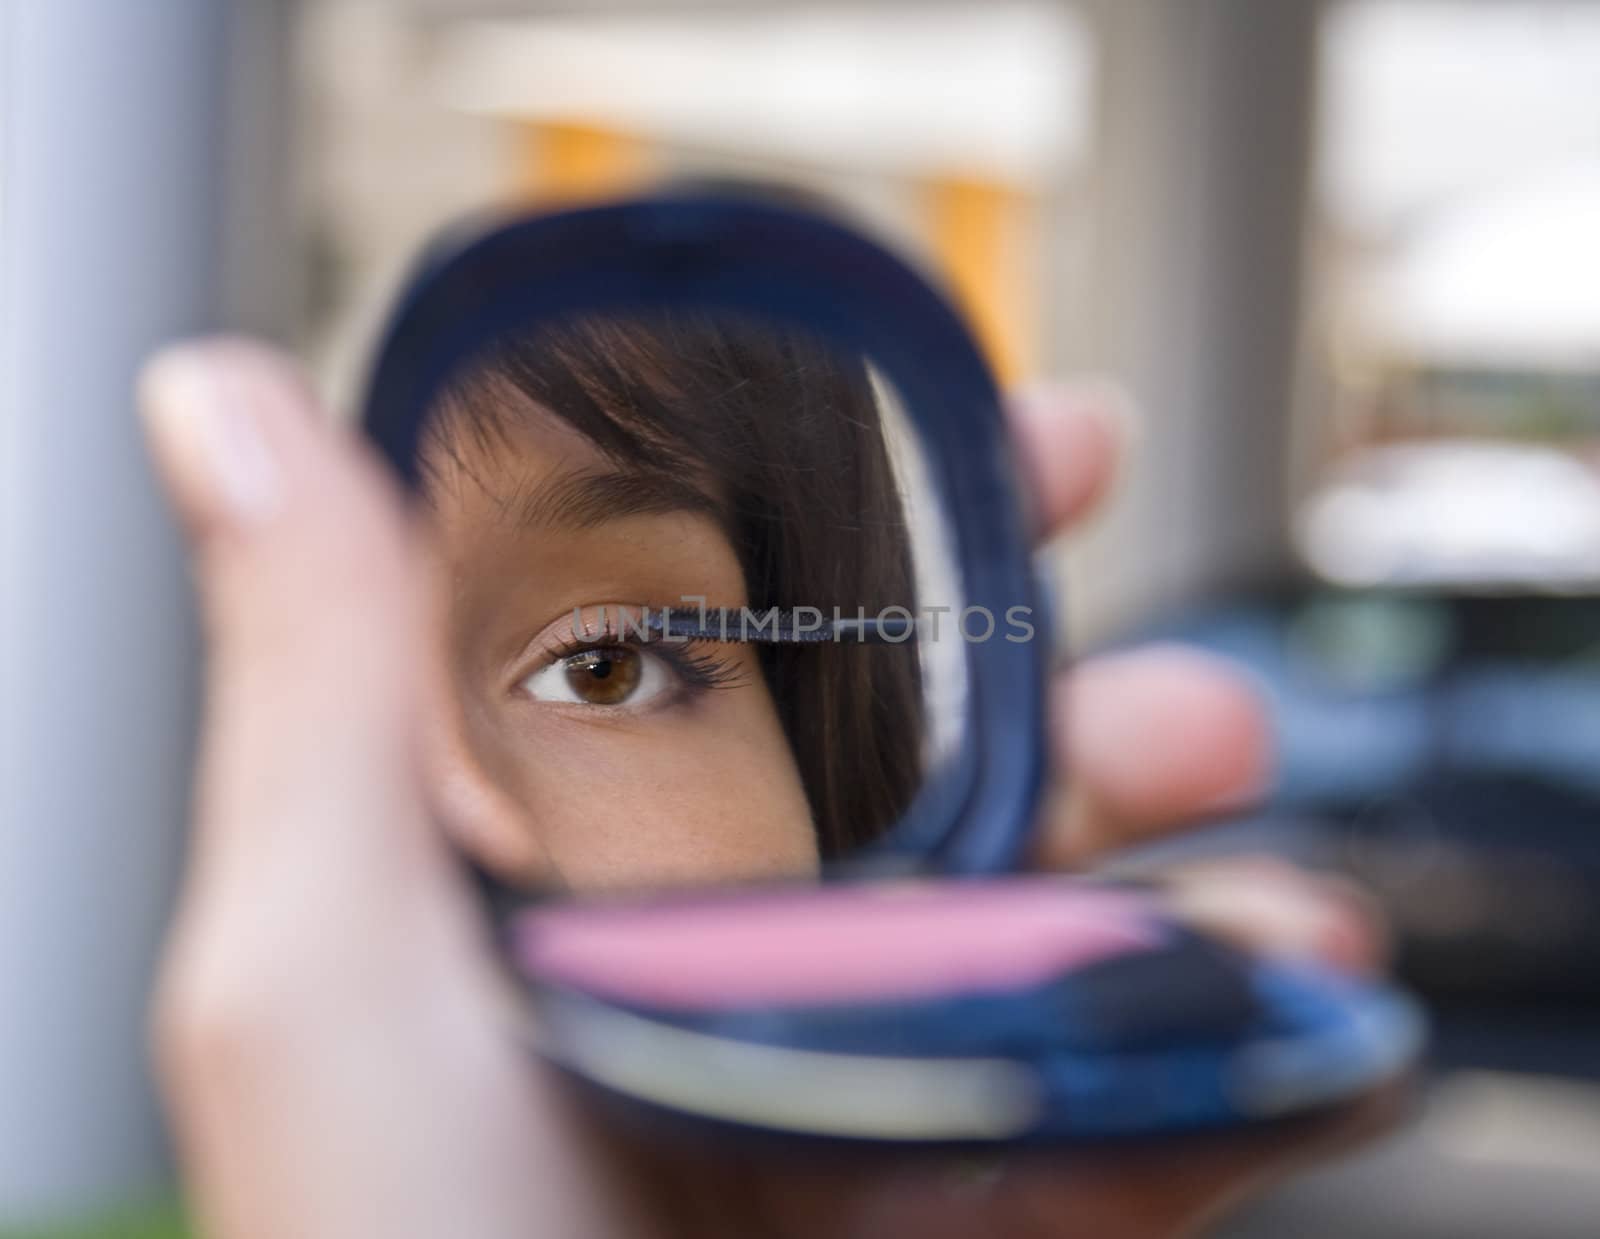 Mirror image of a woman's eye while she is applying mascara against a urban blured background.